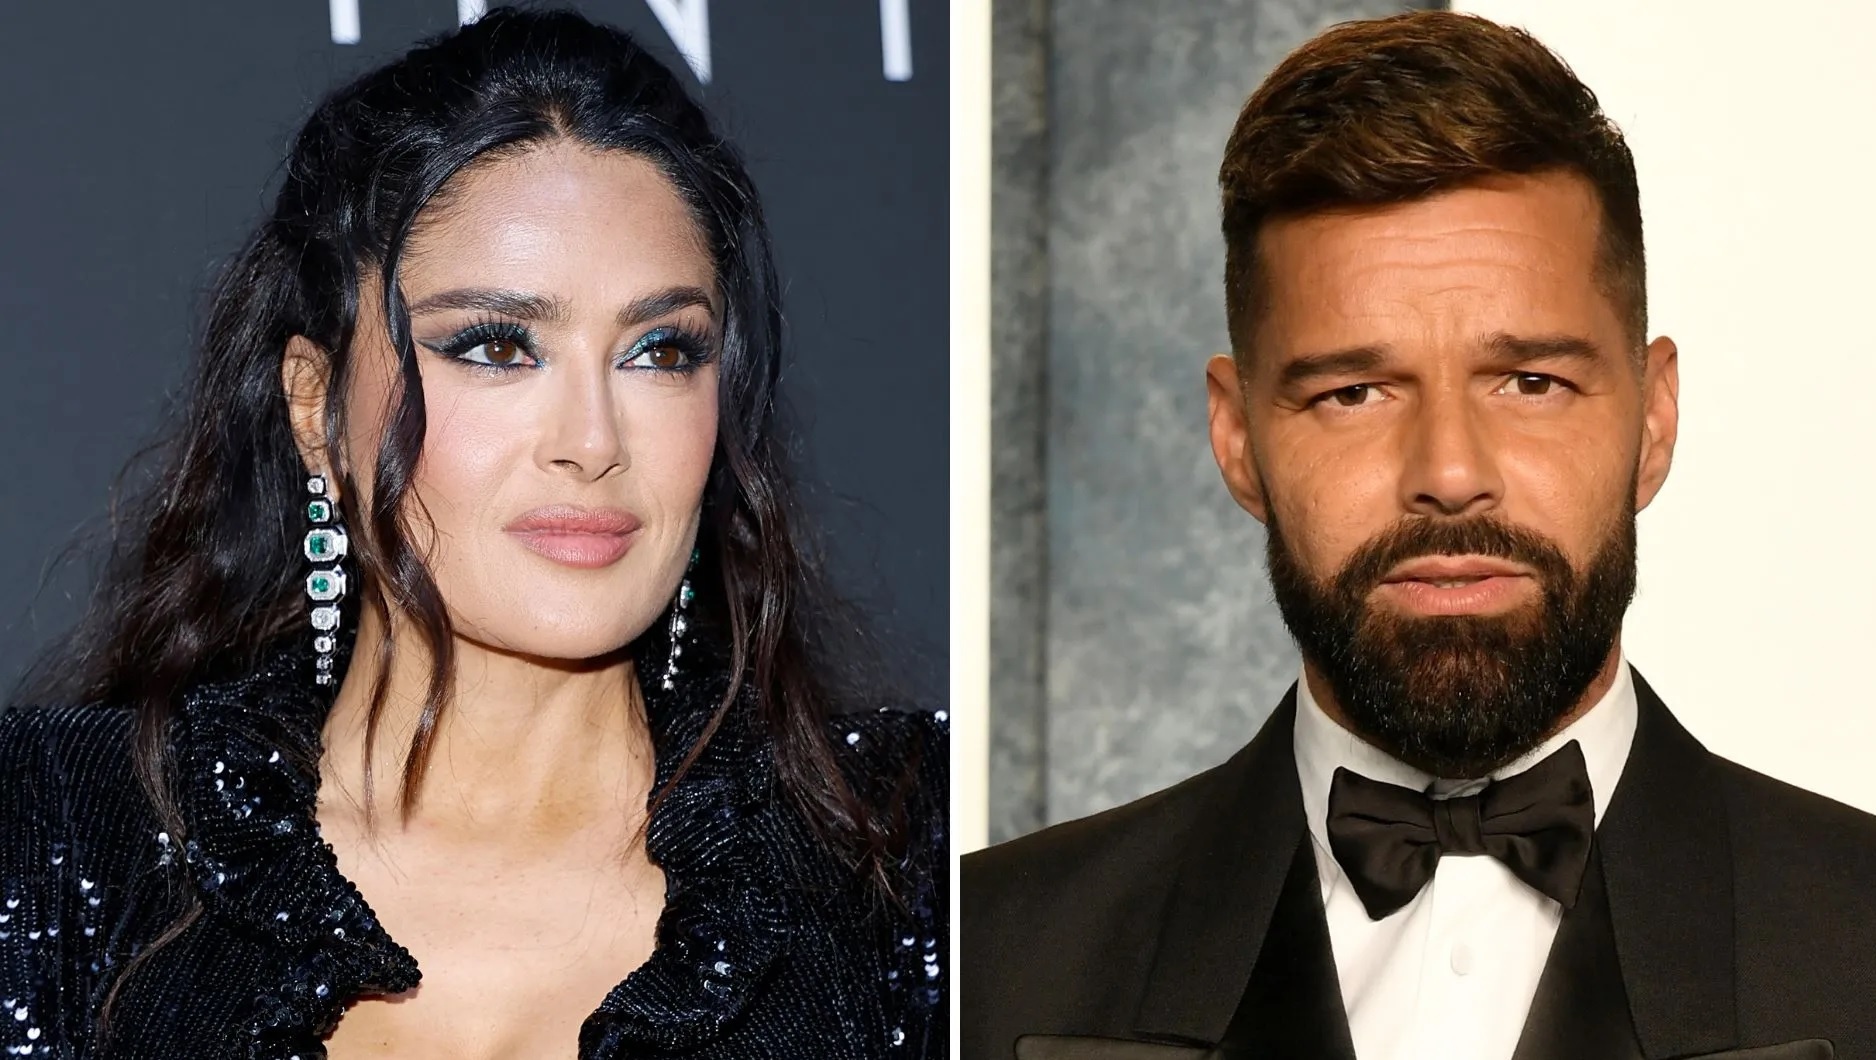 Ricky Martin and the day he flirted with Salma Hayek on national television